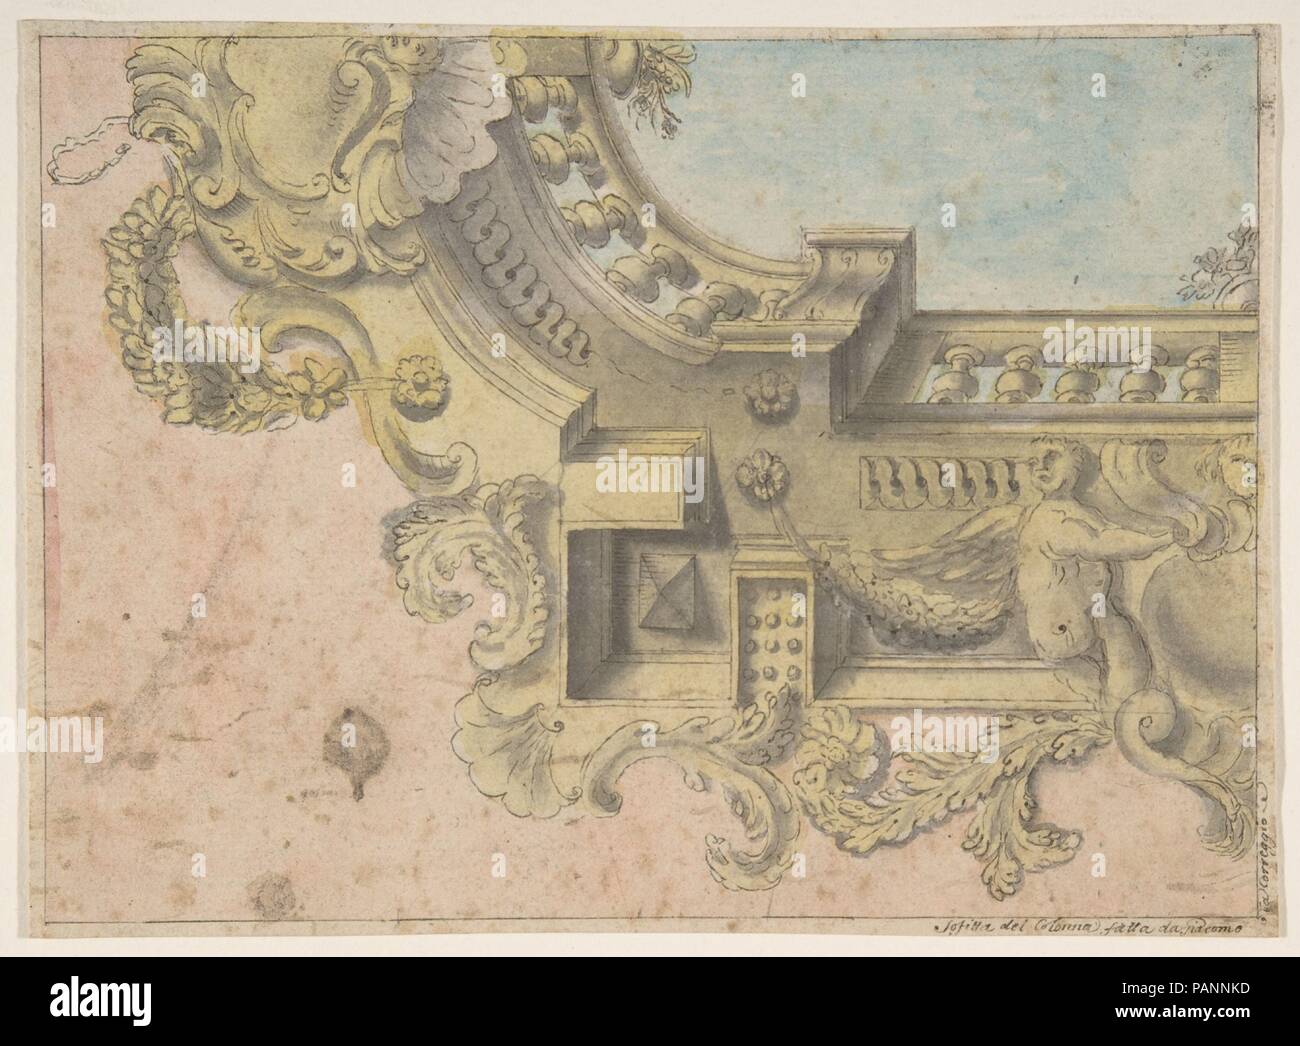 Design for a Decorated Ceiling with Putti and Garlands and a Forshortening of a Balustrade Around an Oculus. Artist: Workshop assistant of Michelangelo Colonna (Italian, Ravenna/Como 1604-1687 Bologna). Dimensions: sheet: 5 1/2 x 7 1/2 in. (14 x 19.1 cm). Date: 17th century. Museum: Metropolitan Museum of Art, New York, USA. Stock Photo